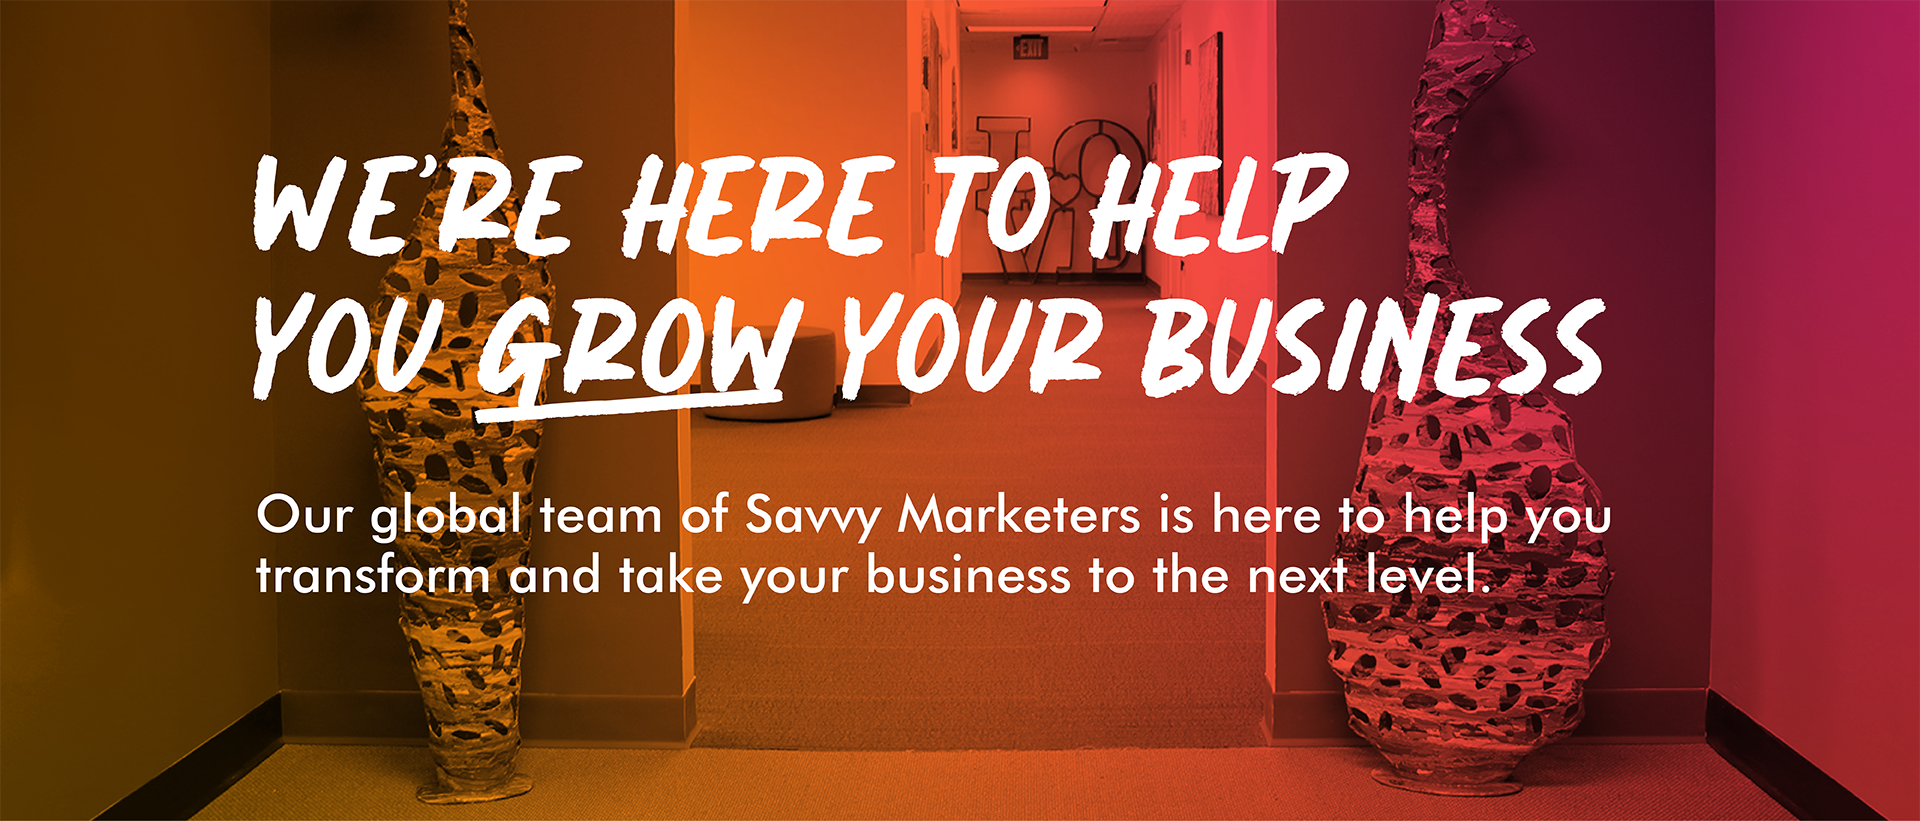 Header Image: We're here to help you grow your business